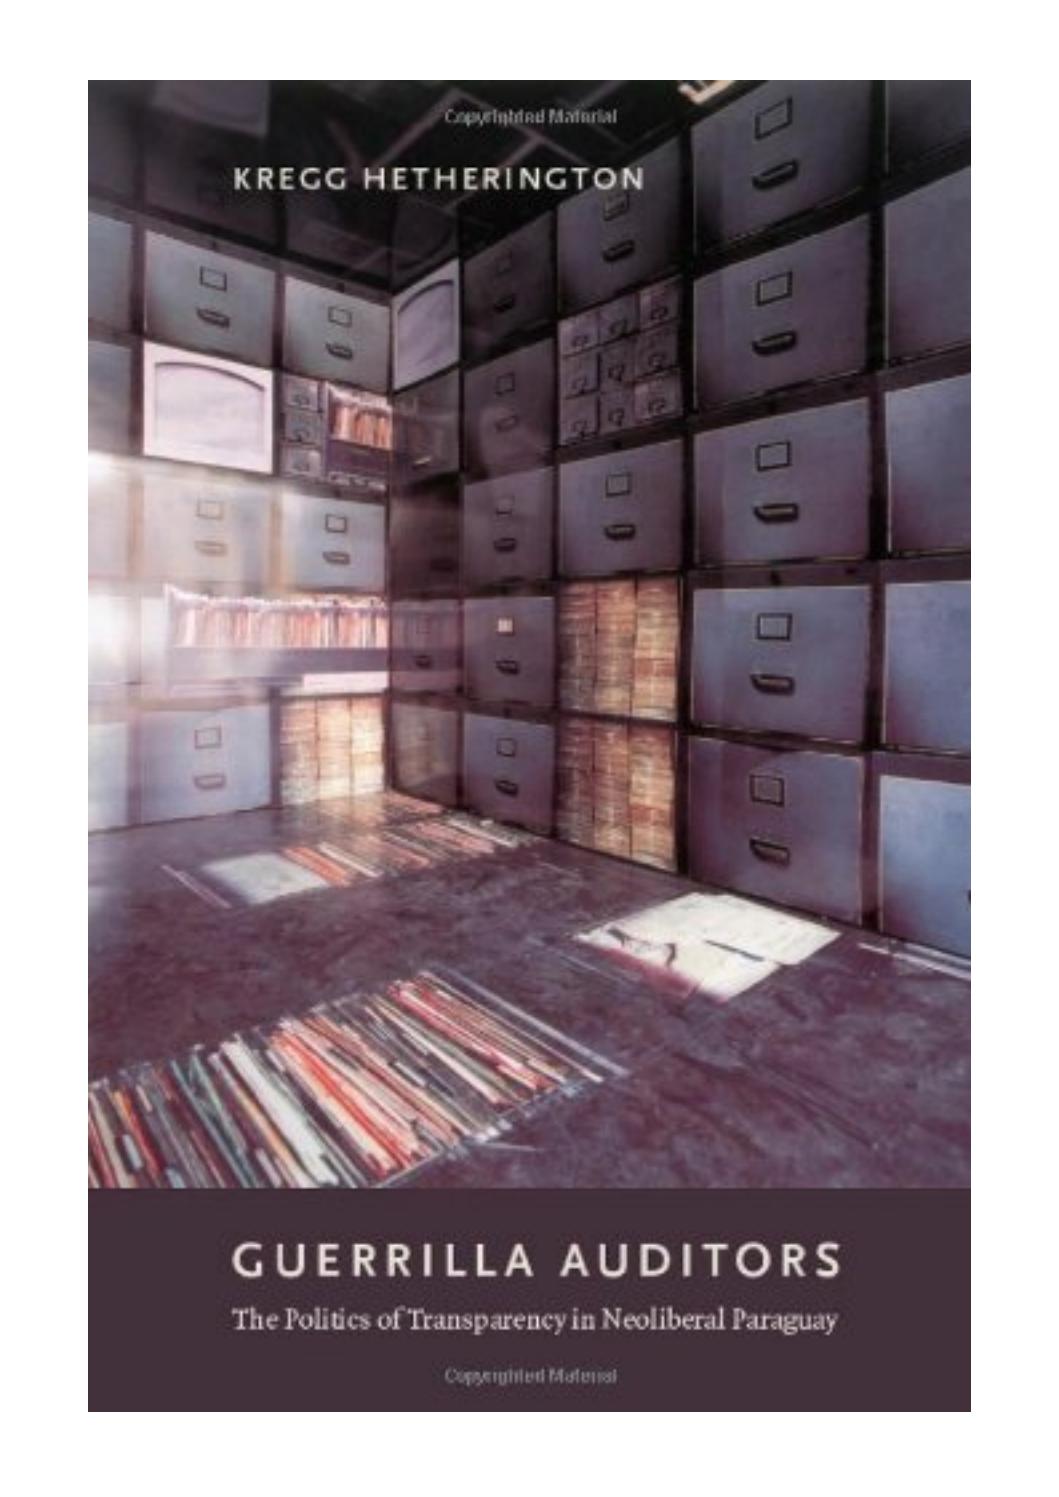 Guerrilla Auditors: the Politics of Transparency in Neoliberal Paraguay